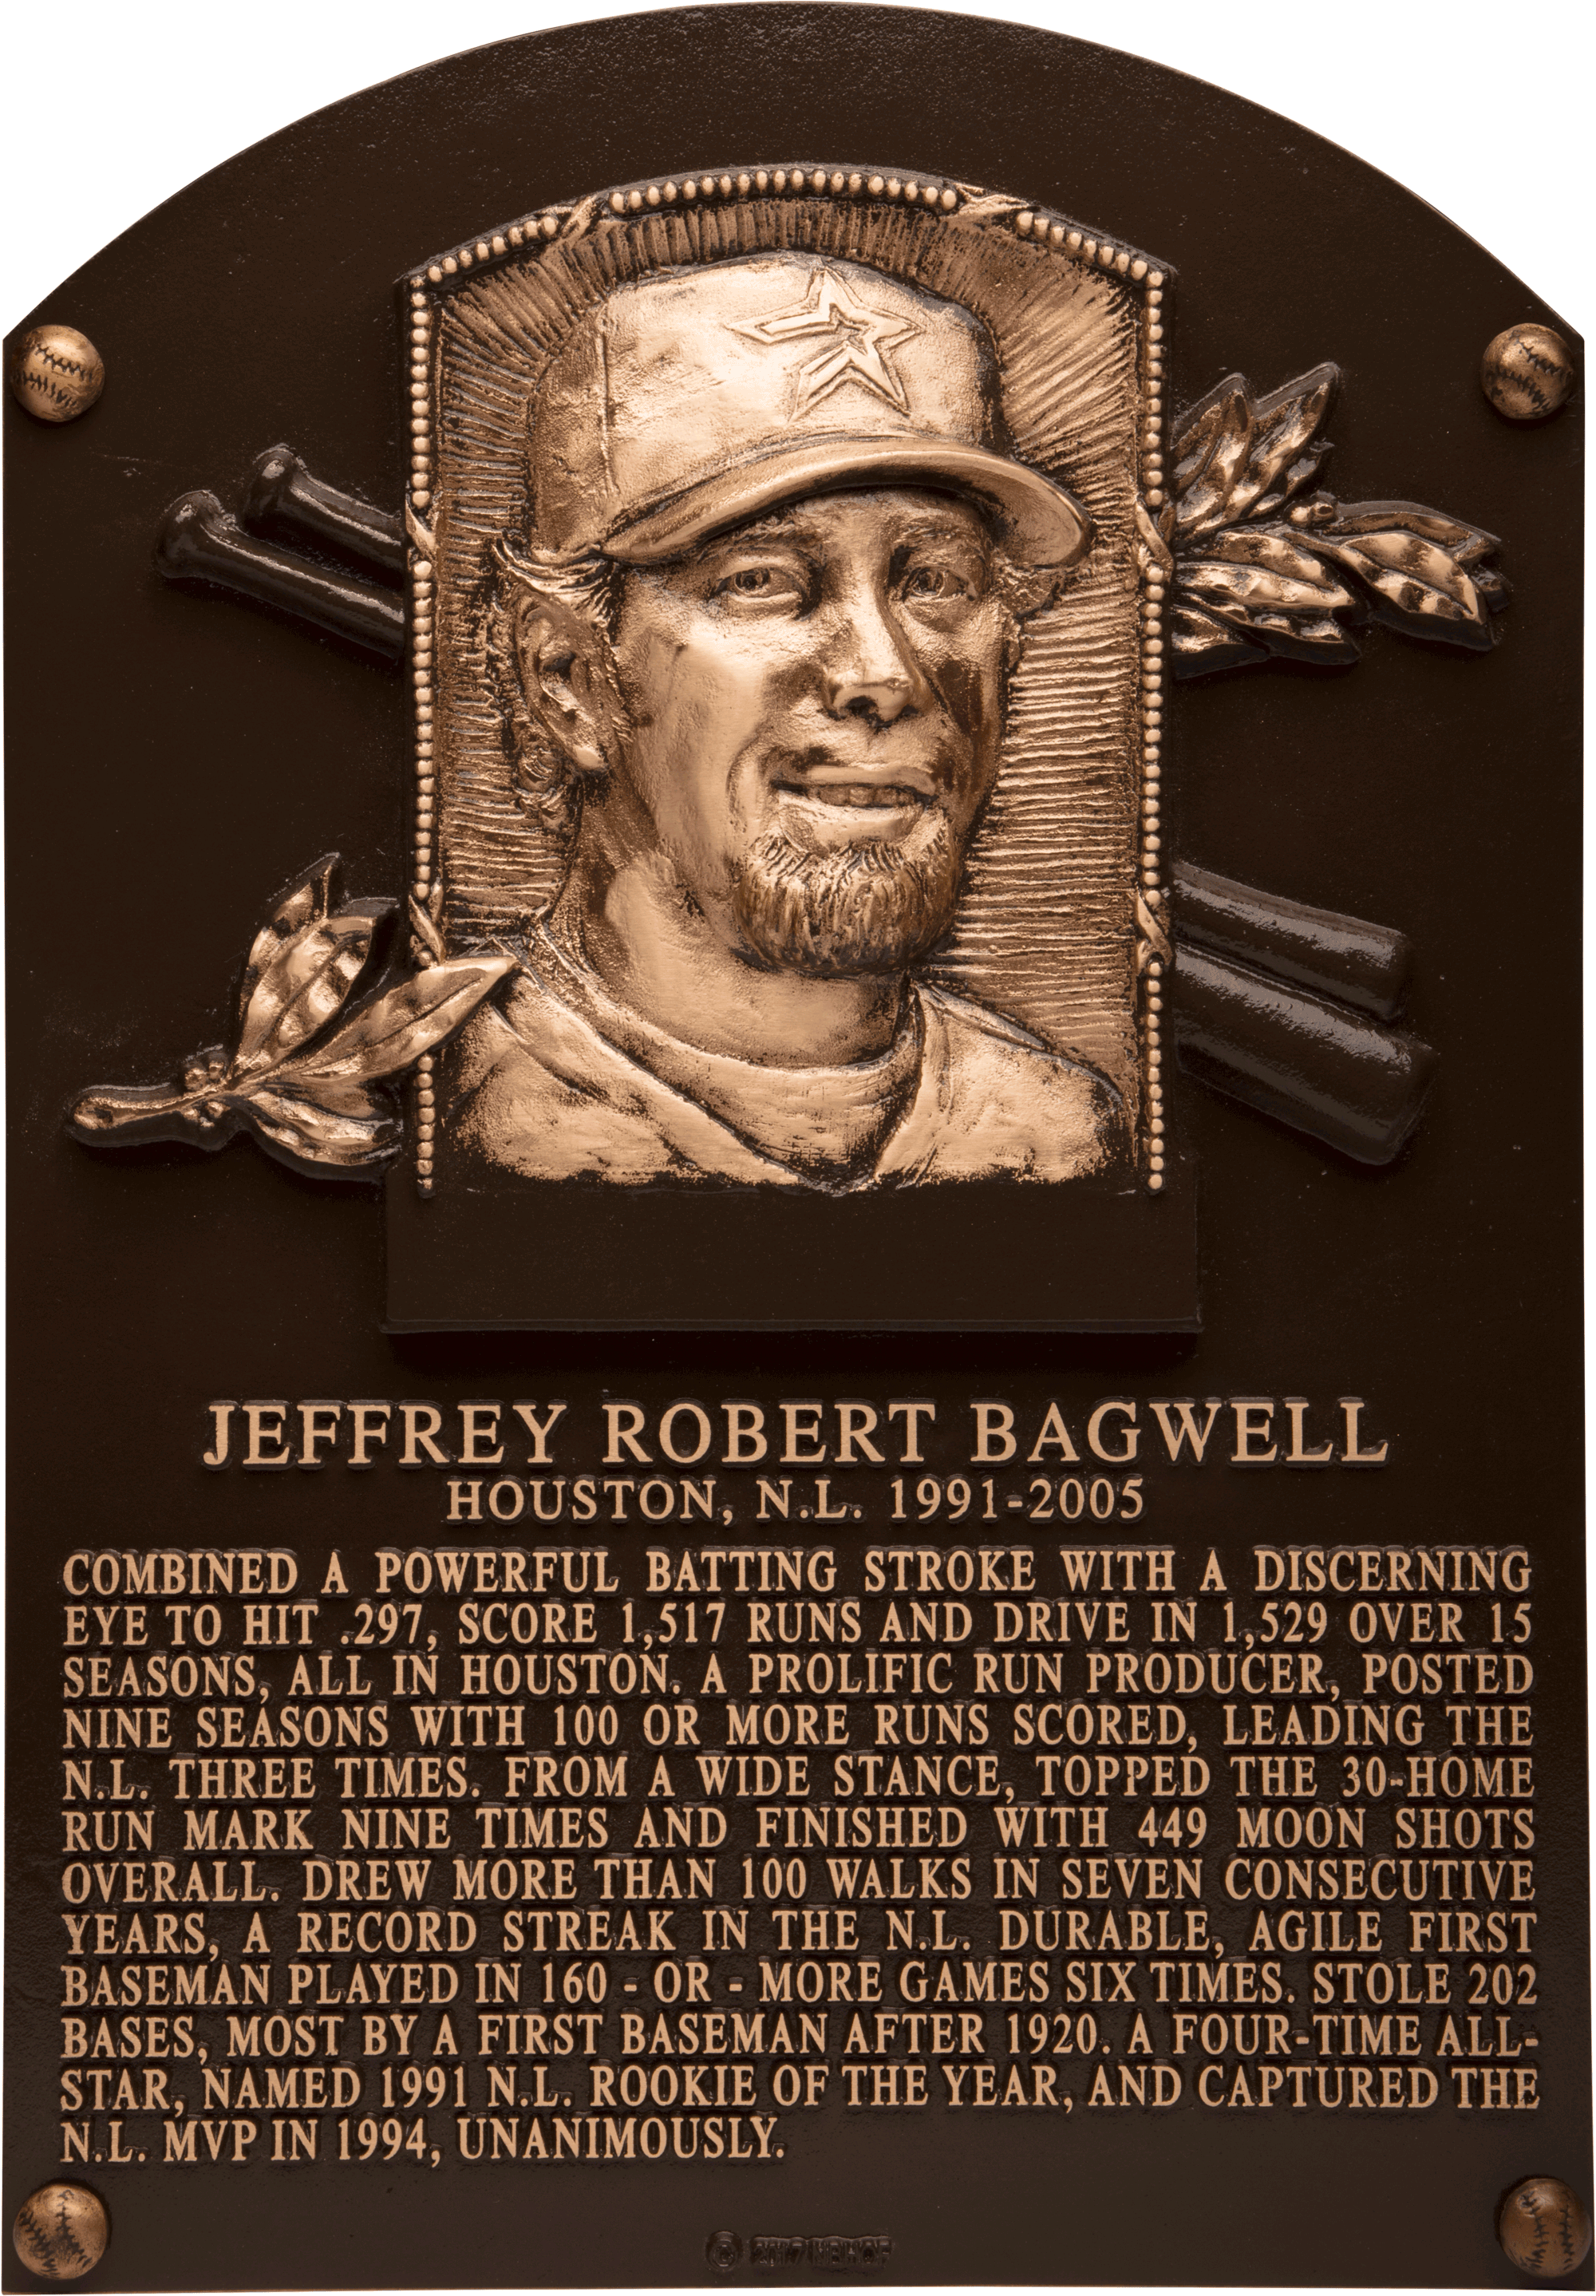 Jeff Bagwell Hall of Fame plaque